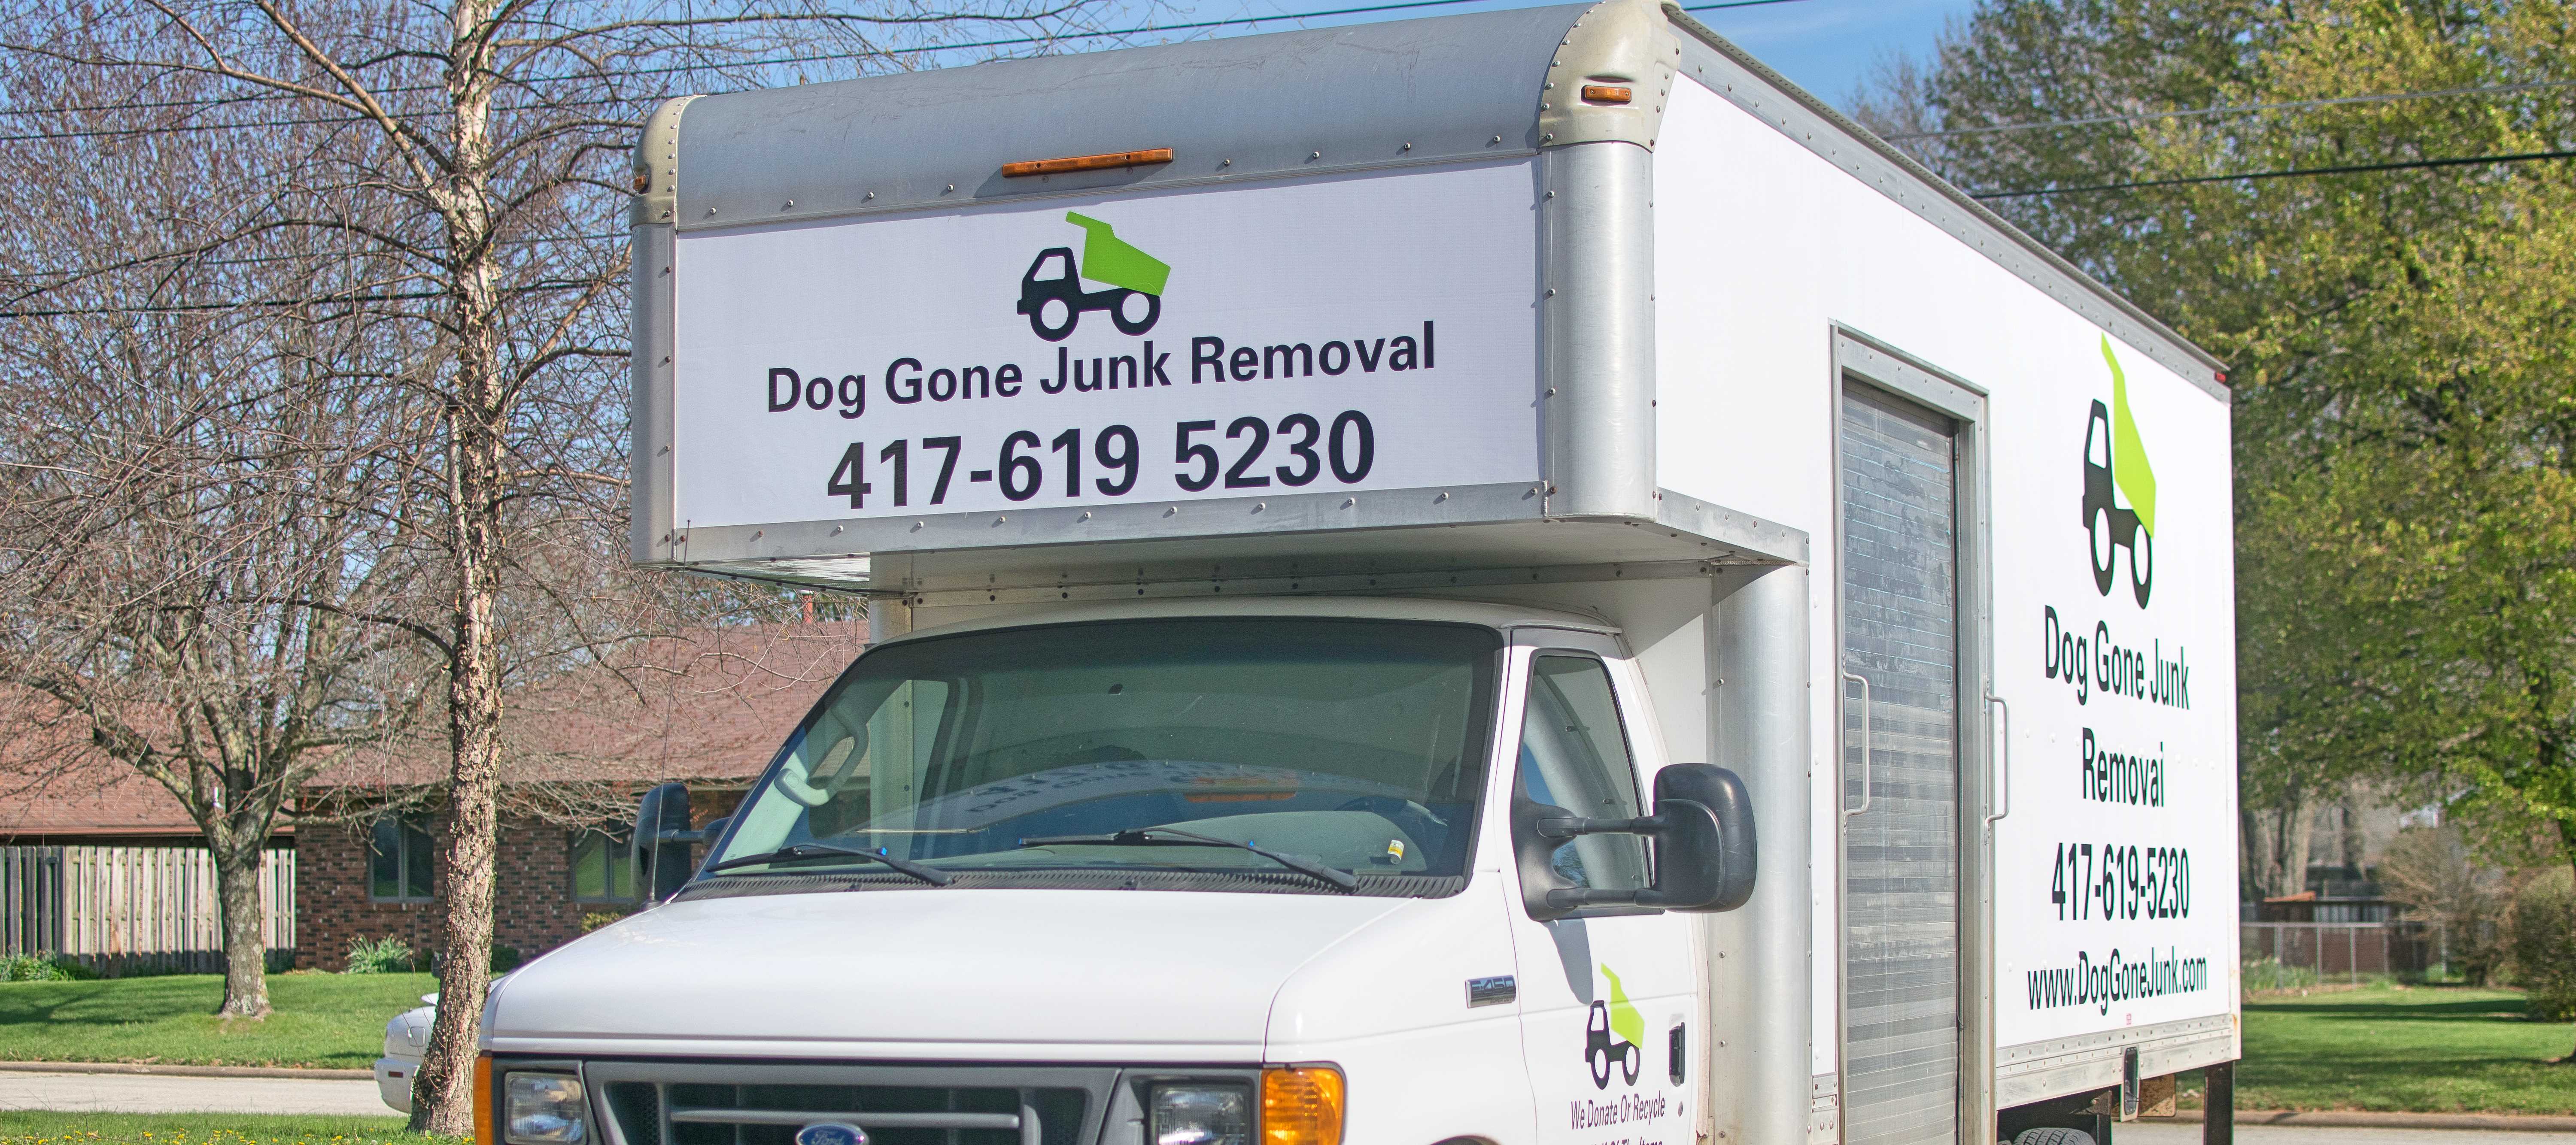 Privacy Policy For Our Junk Removal Company in Springfield Missouri